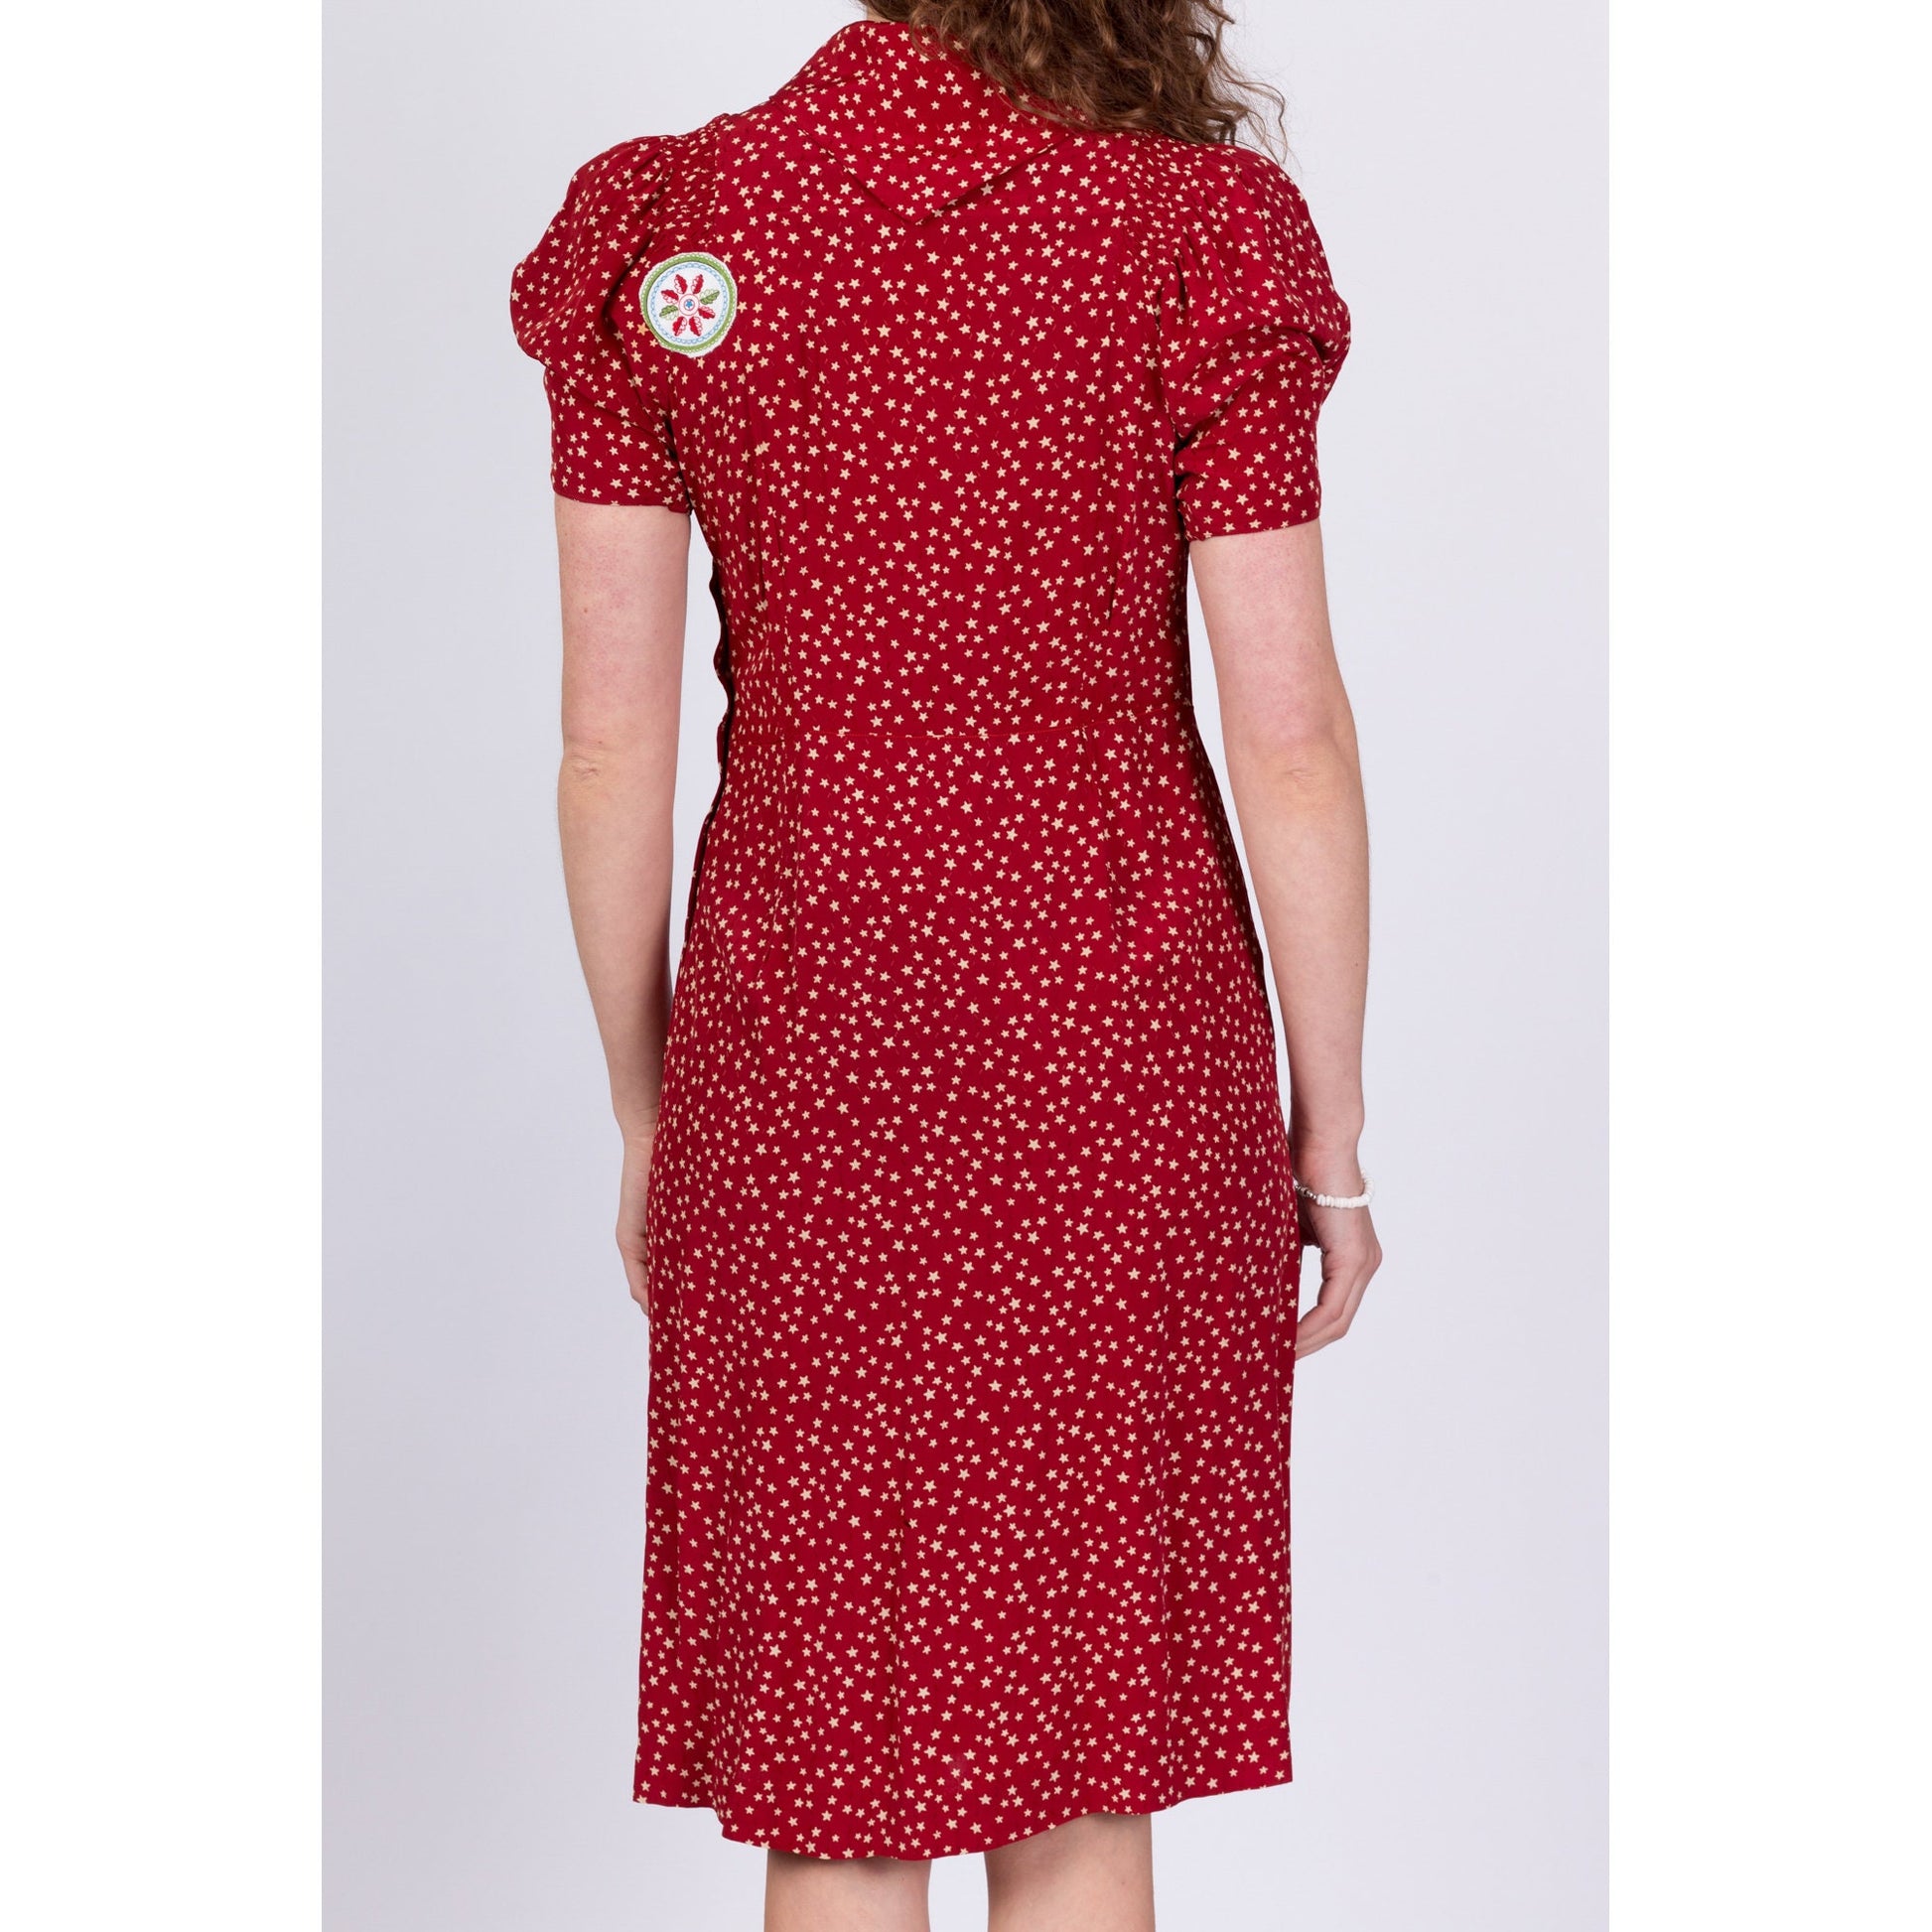 1940s Red Star Print Patched Day Dress, As Is - Small 